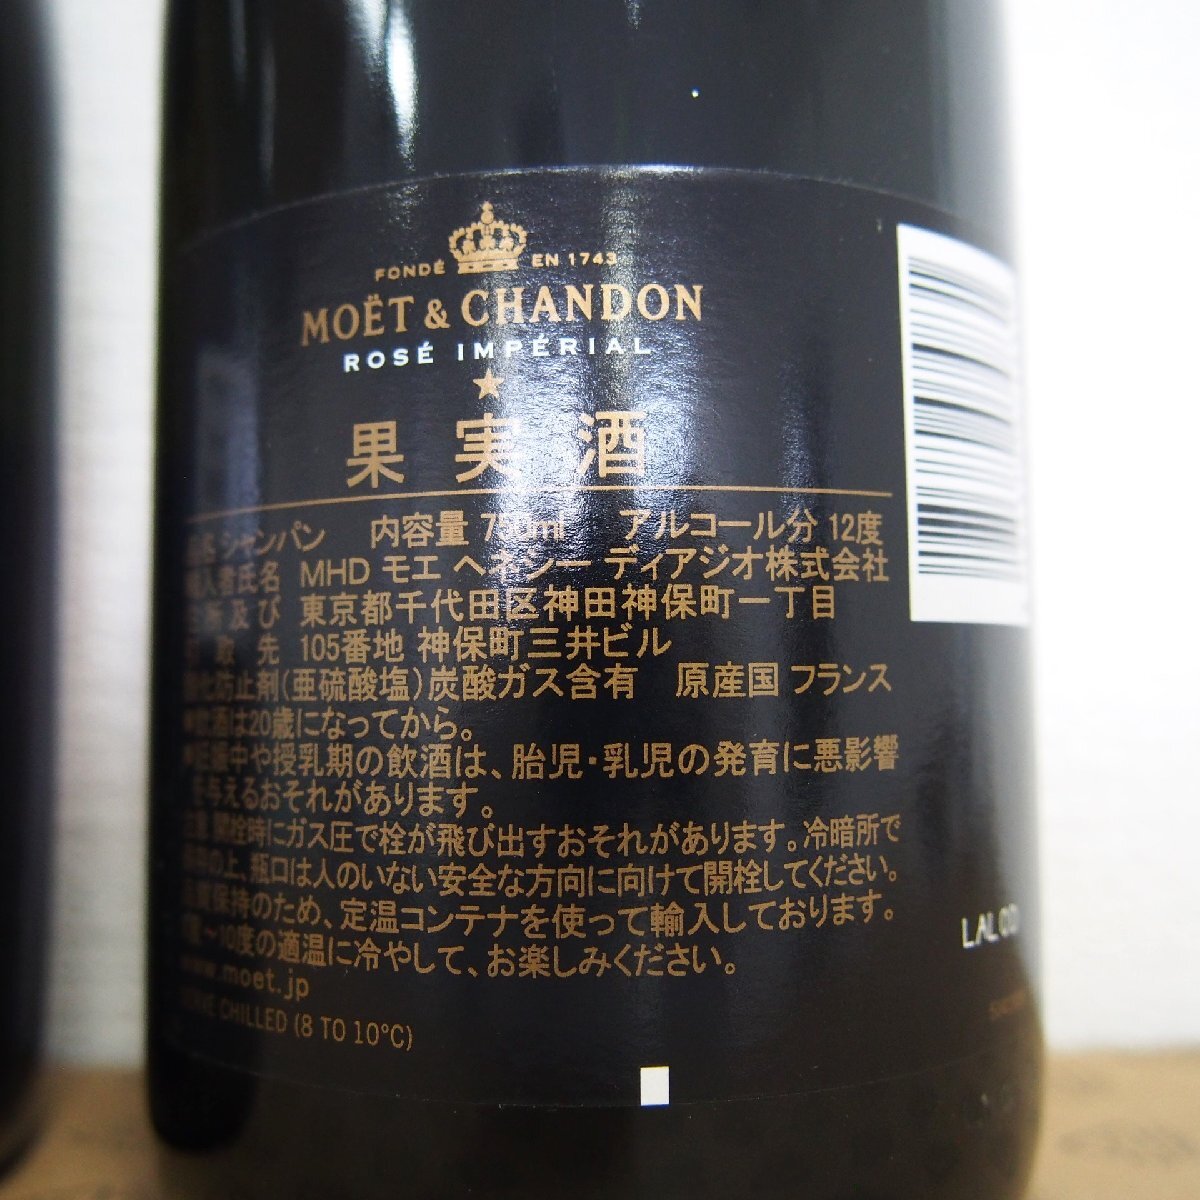 [9356-003S] MOET&CHANDON rose yellowtail .to Anne pe real 2 pcs set [ used * not yet . plug ]moe*e* car n Don champagne 750ml 12%